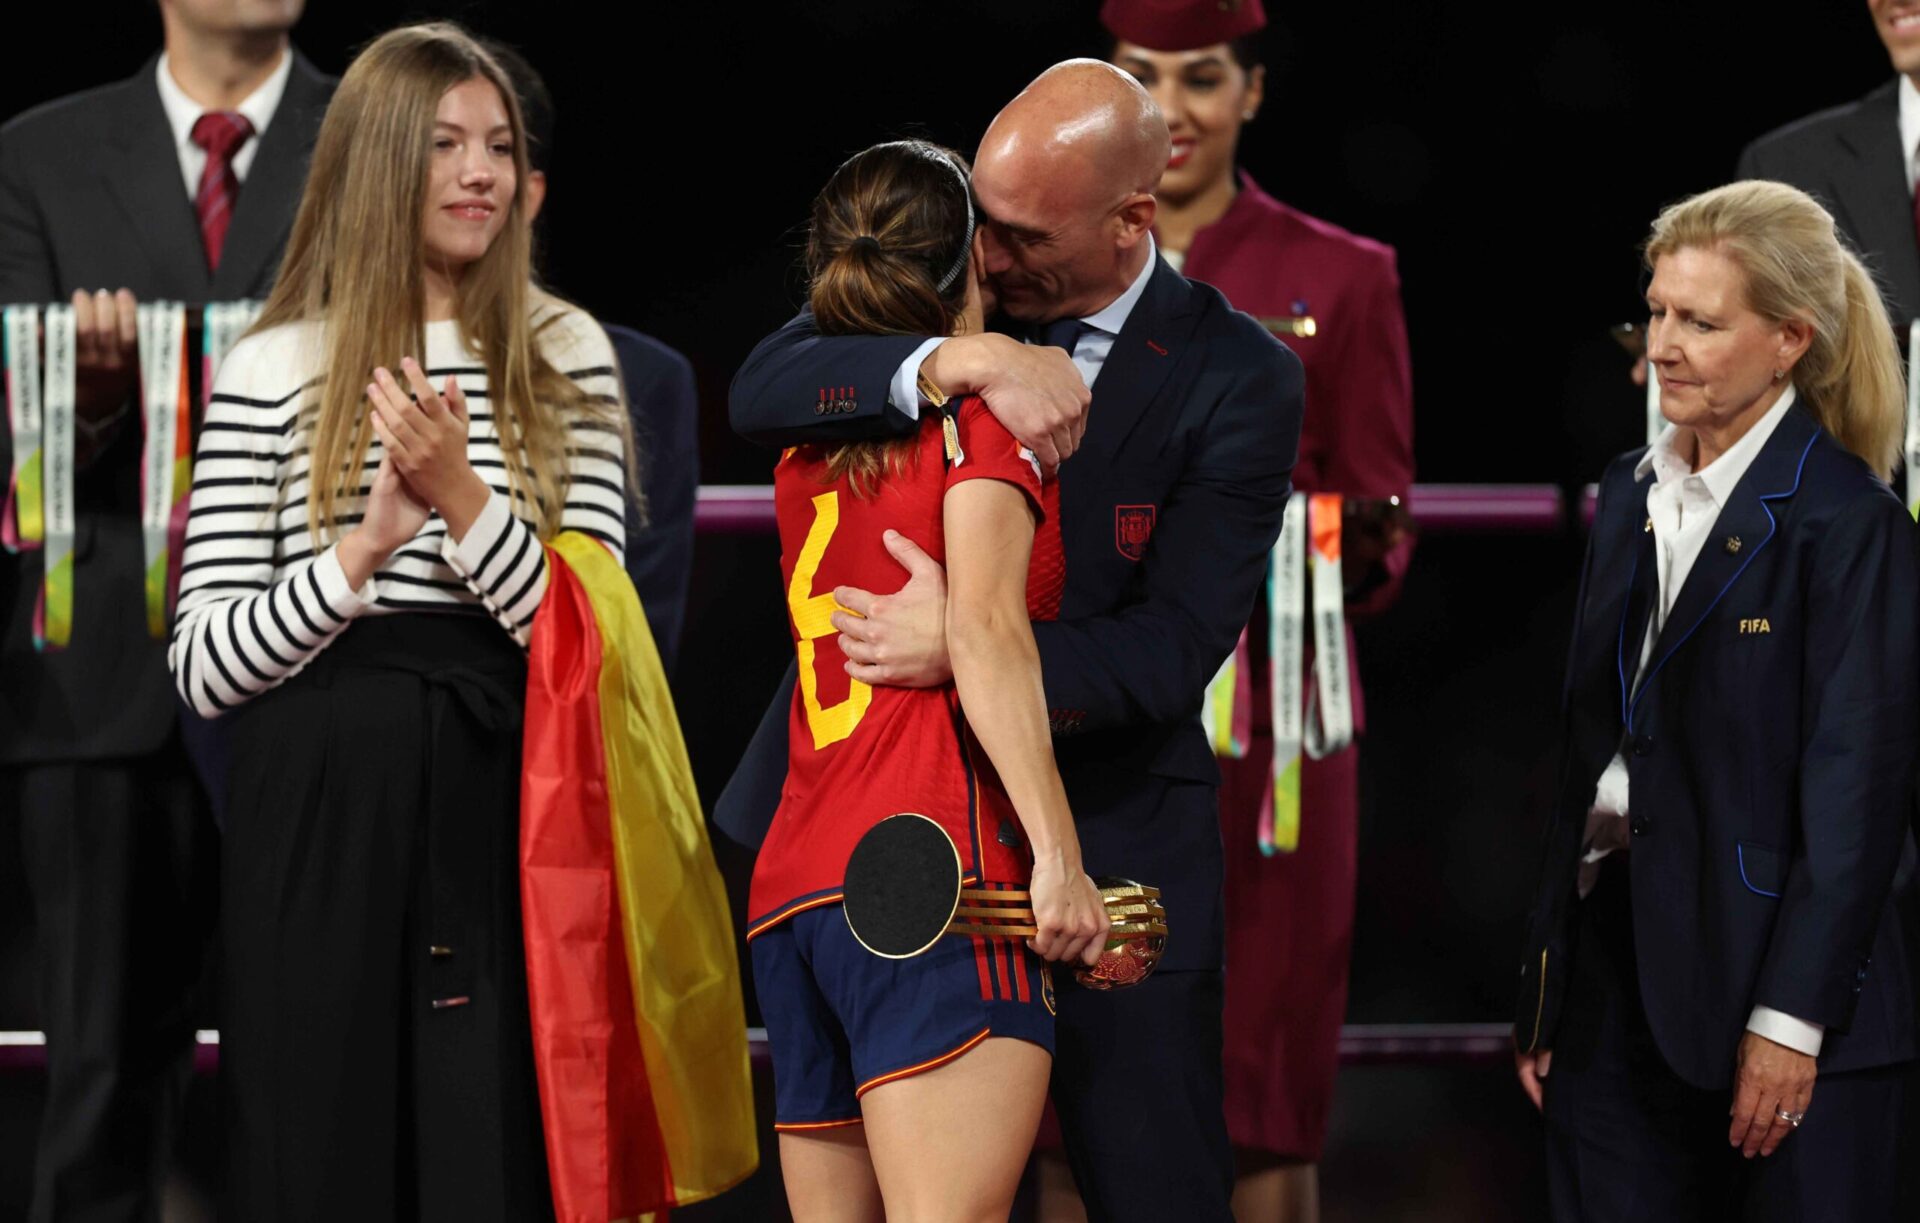 Spanish Prosecutors Pursue 2.5-Year Prison Term for Rubiales's World Cup Kiss